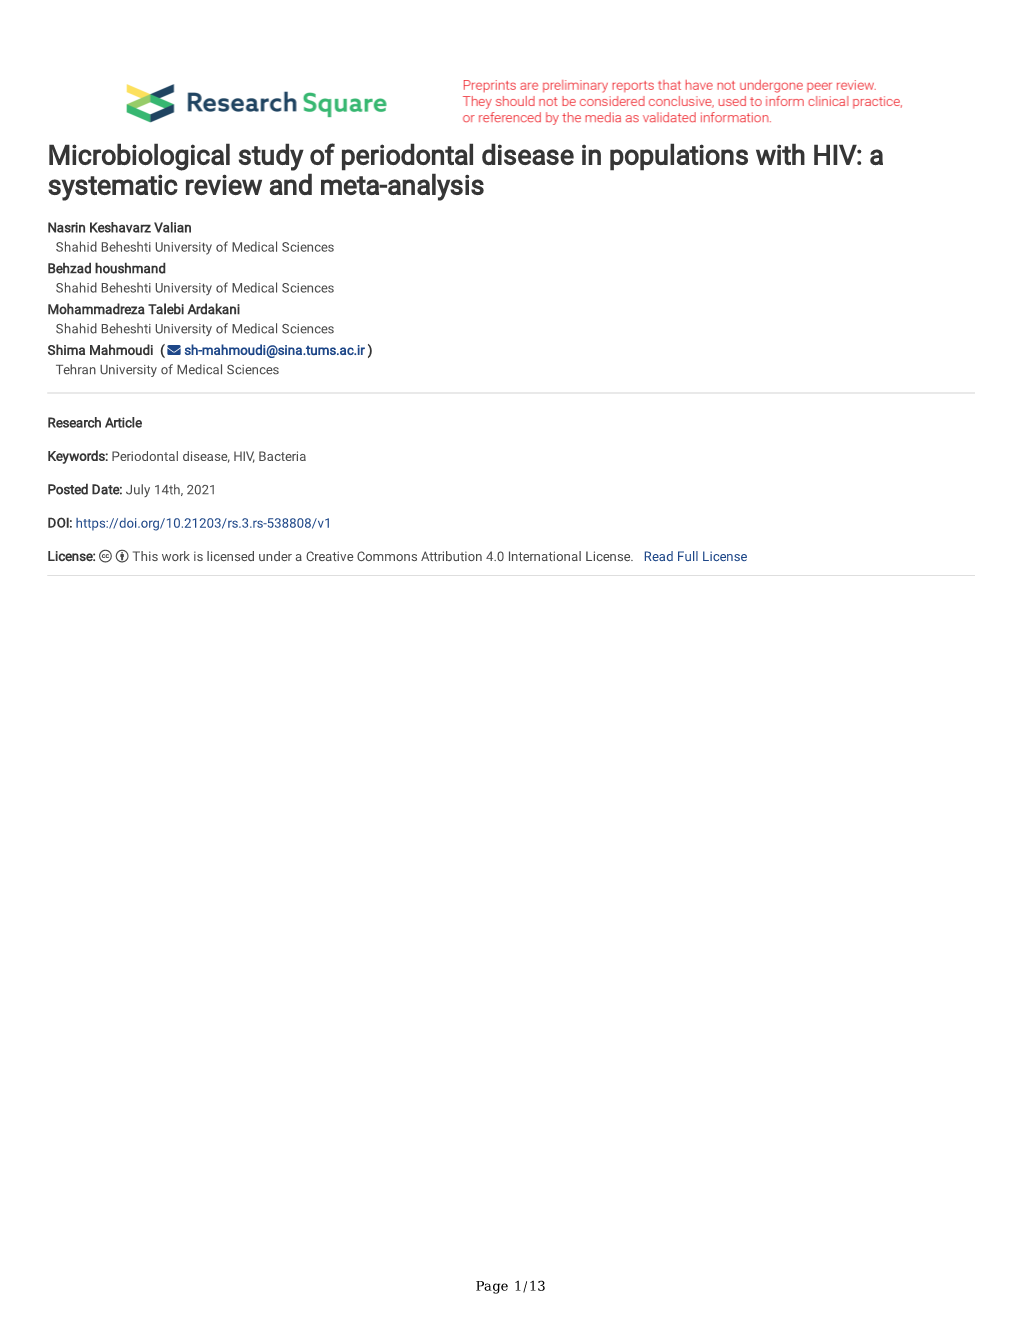 Microbiological Study of Periodontal Disease in Populations with HIV: a Systematic Review and Meta-Analysis